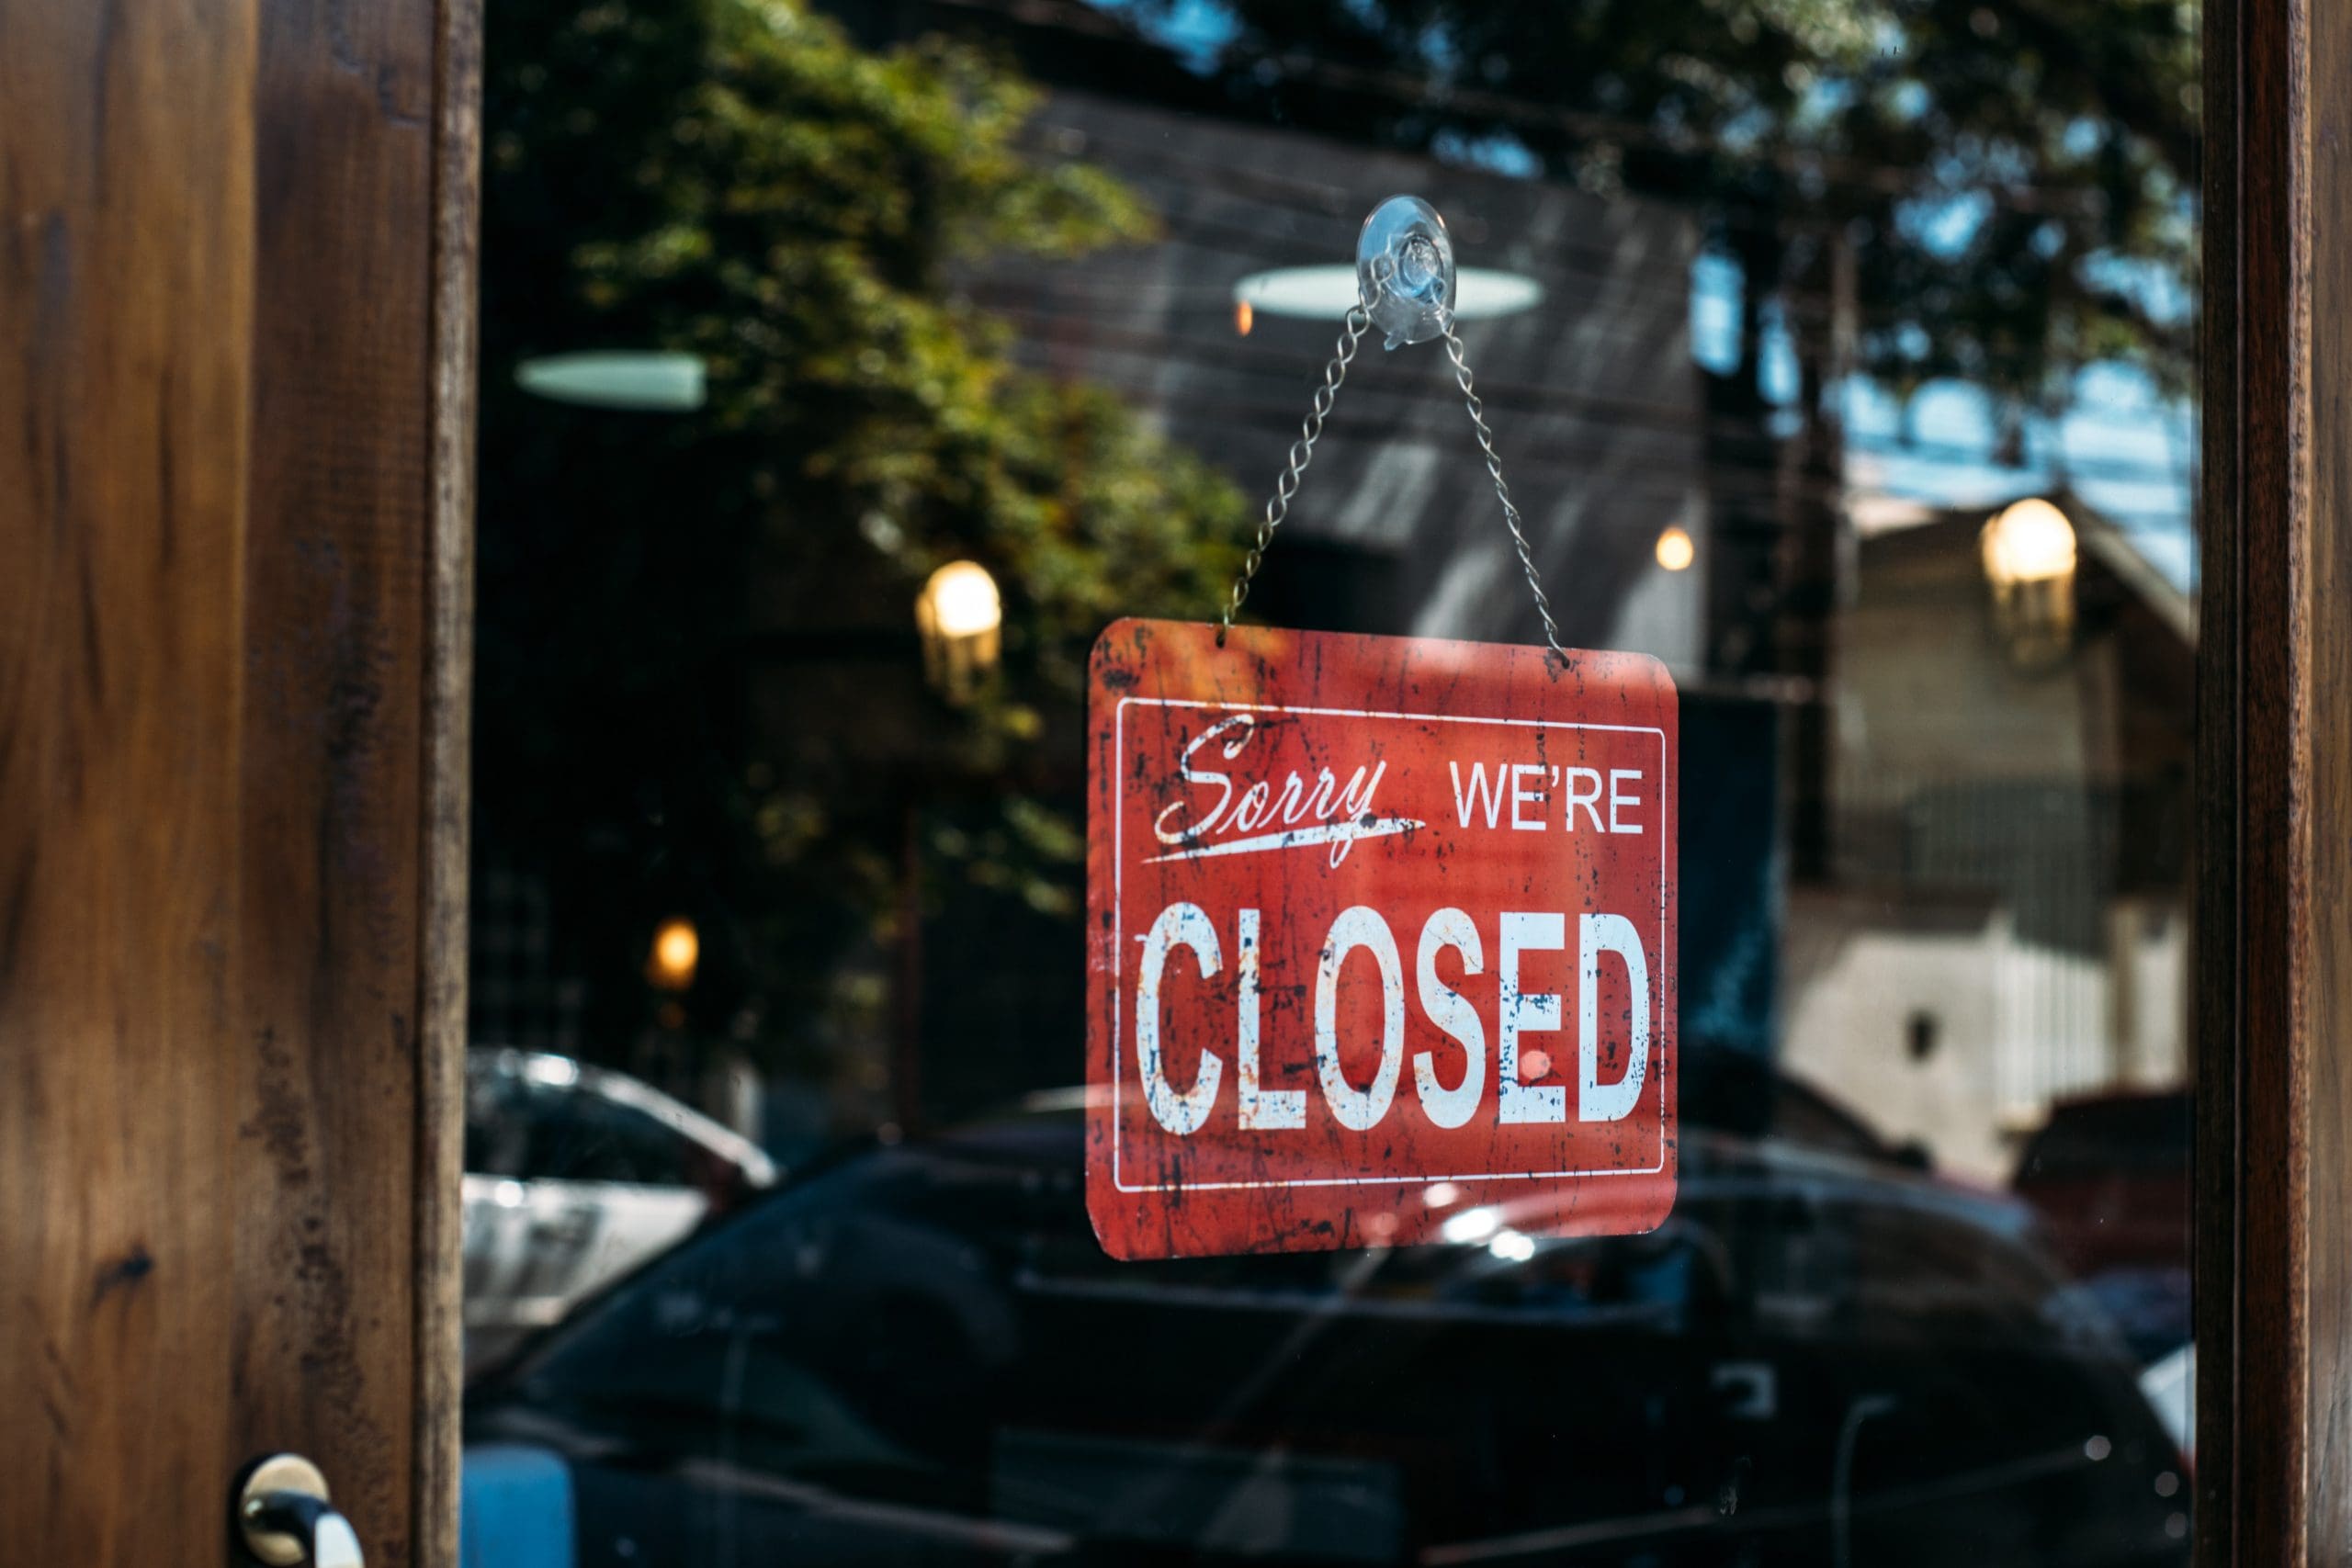 UK SMEs have considered closing